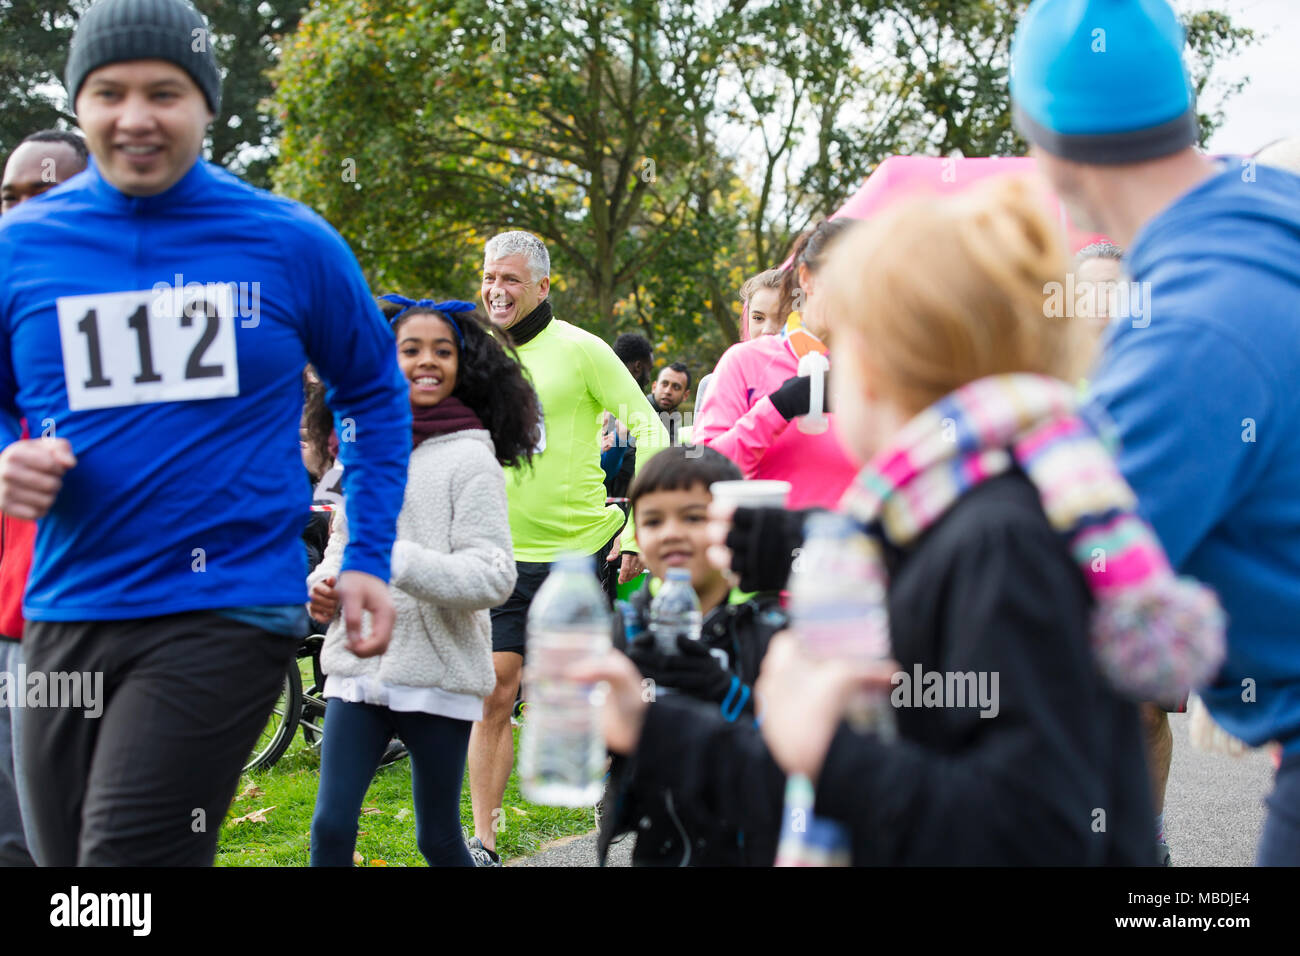 Spectators offering water to runners at charity run in park Stock Photo